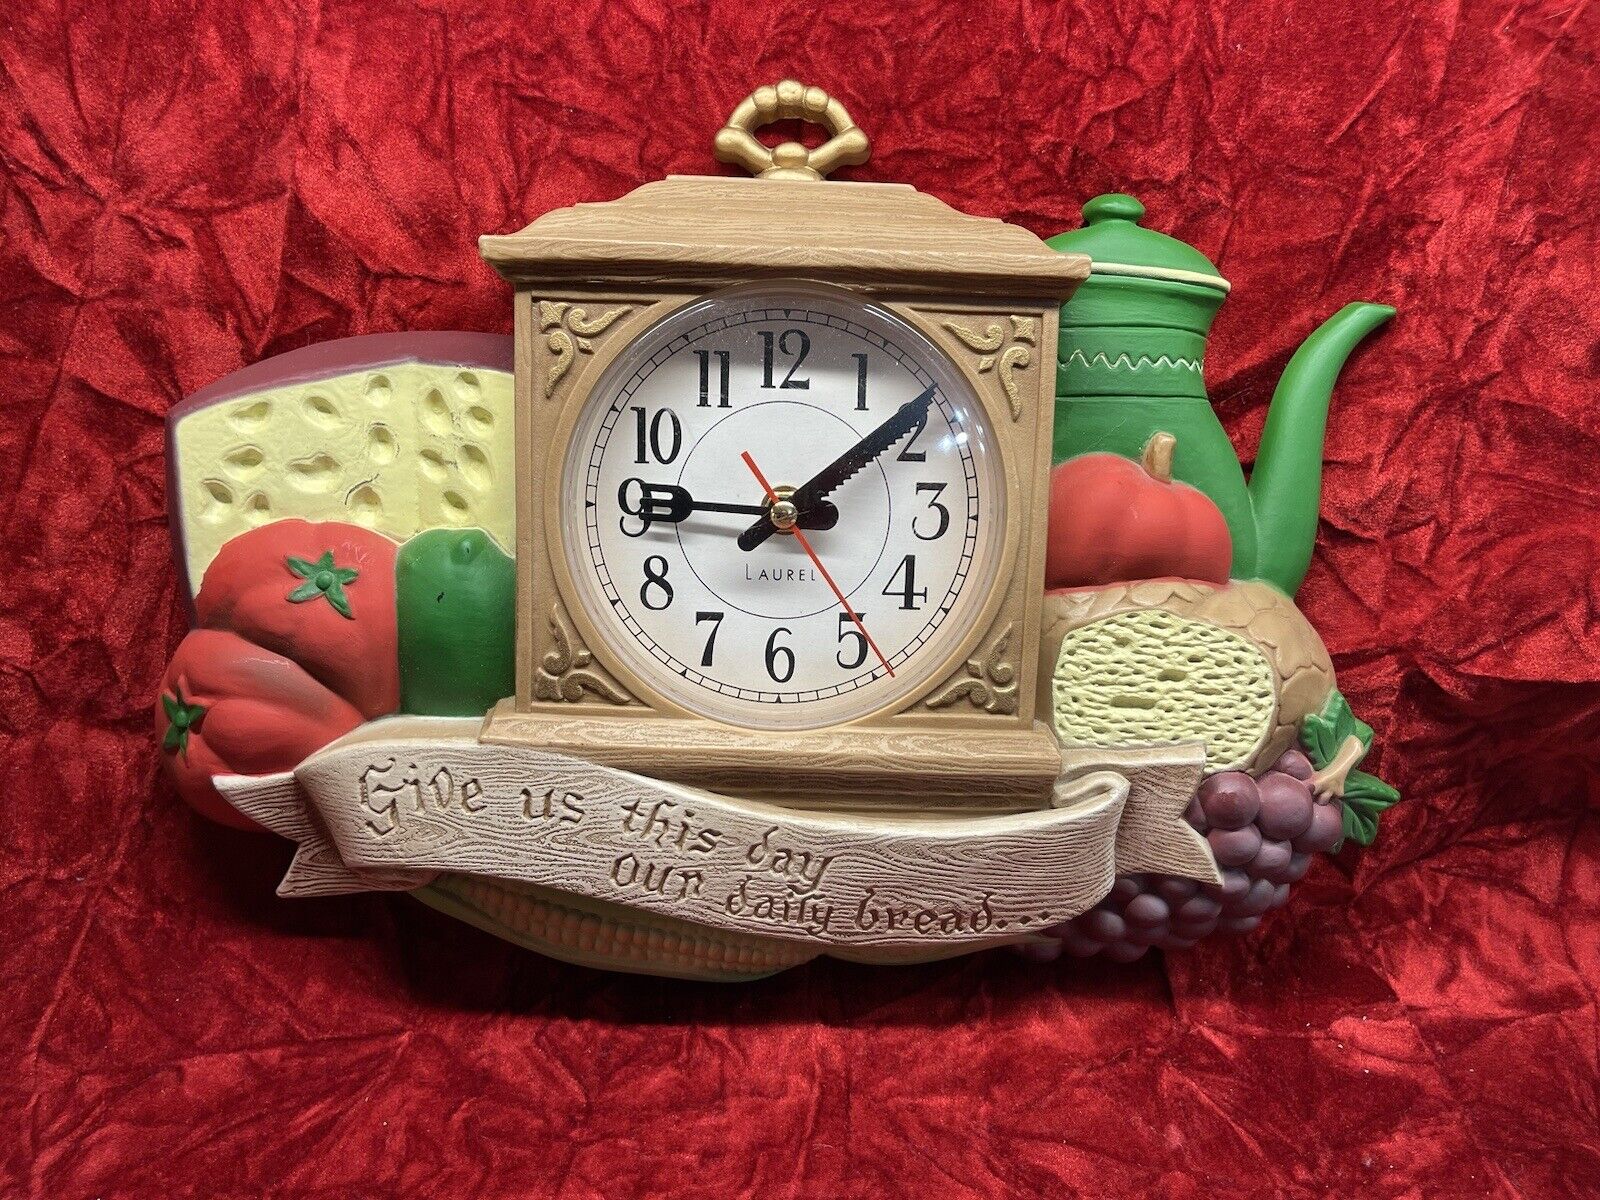 Laurel Give Us This Day Our Daily Bread Kitchen Clock Vintage Works